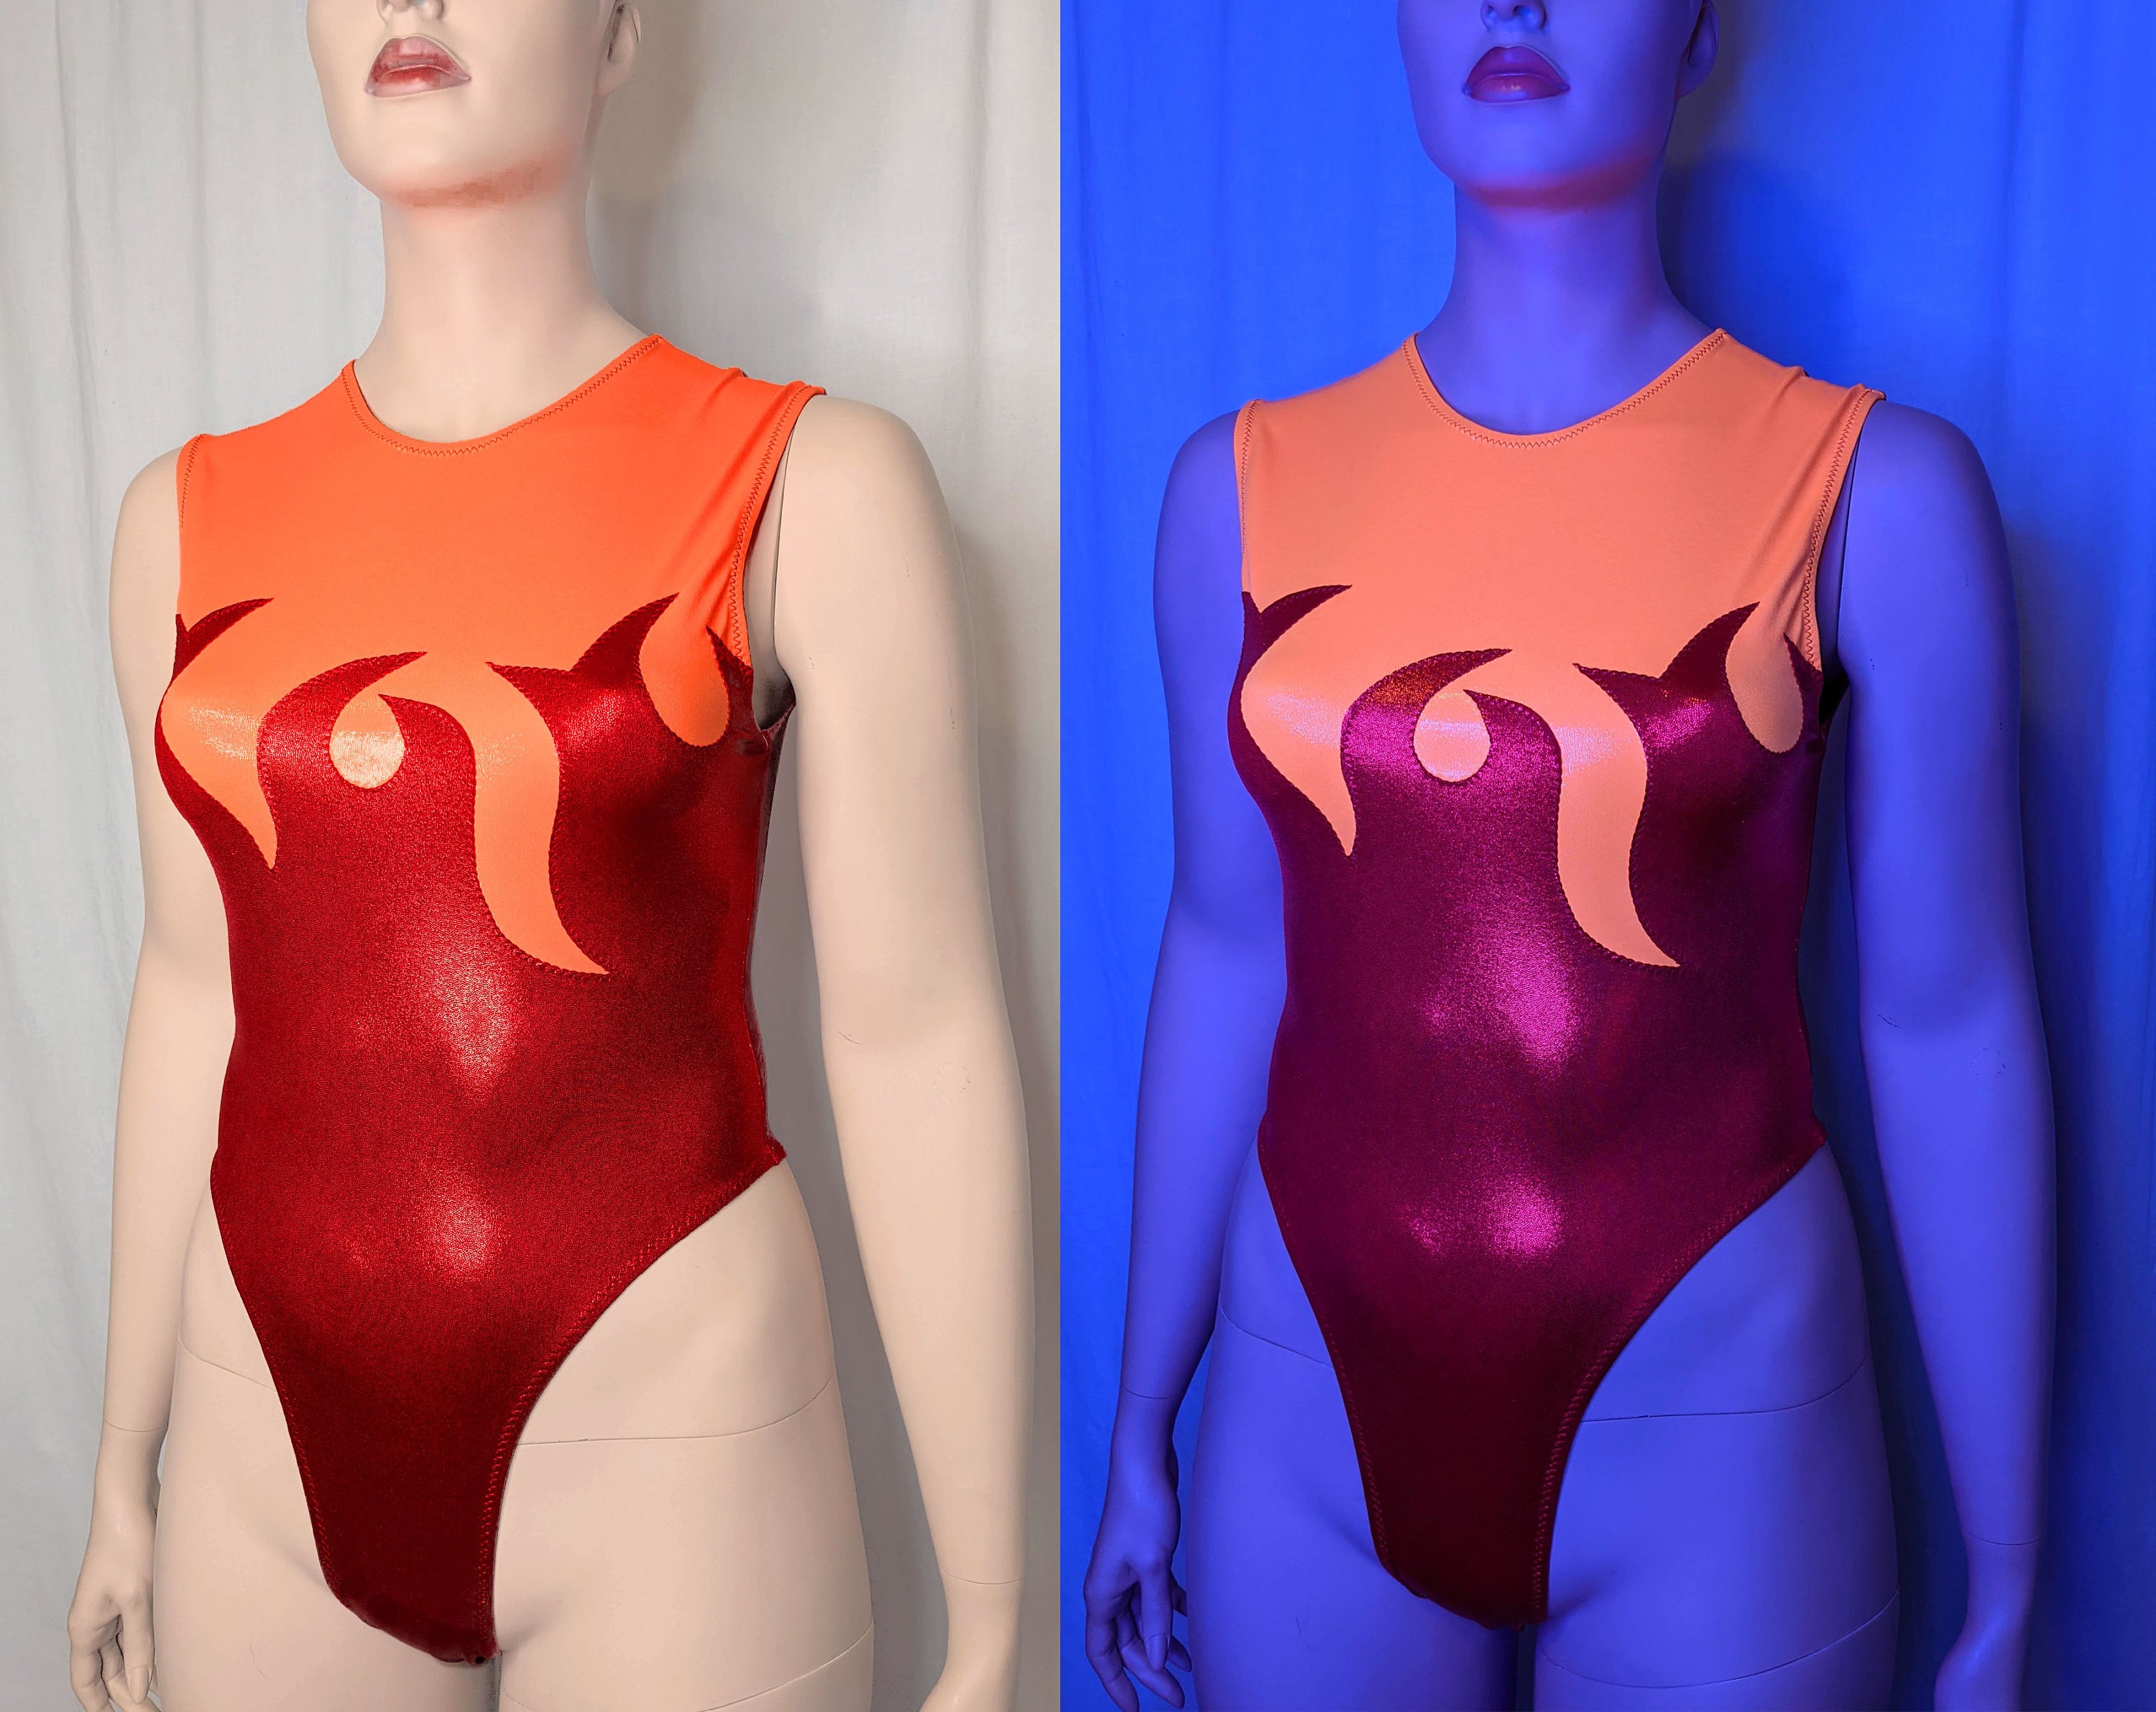 80s Fire Costume Flame Bodysuit High Cut Thong Leotard GLOW Wrestling  Leotard Ladies of Wrestling Costume Rave One Piece Festival Outfit -   Canada